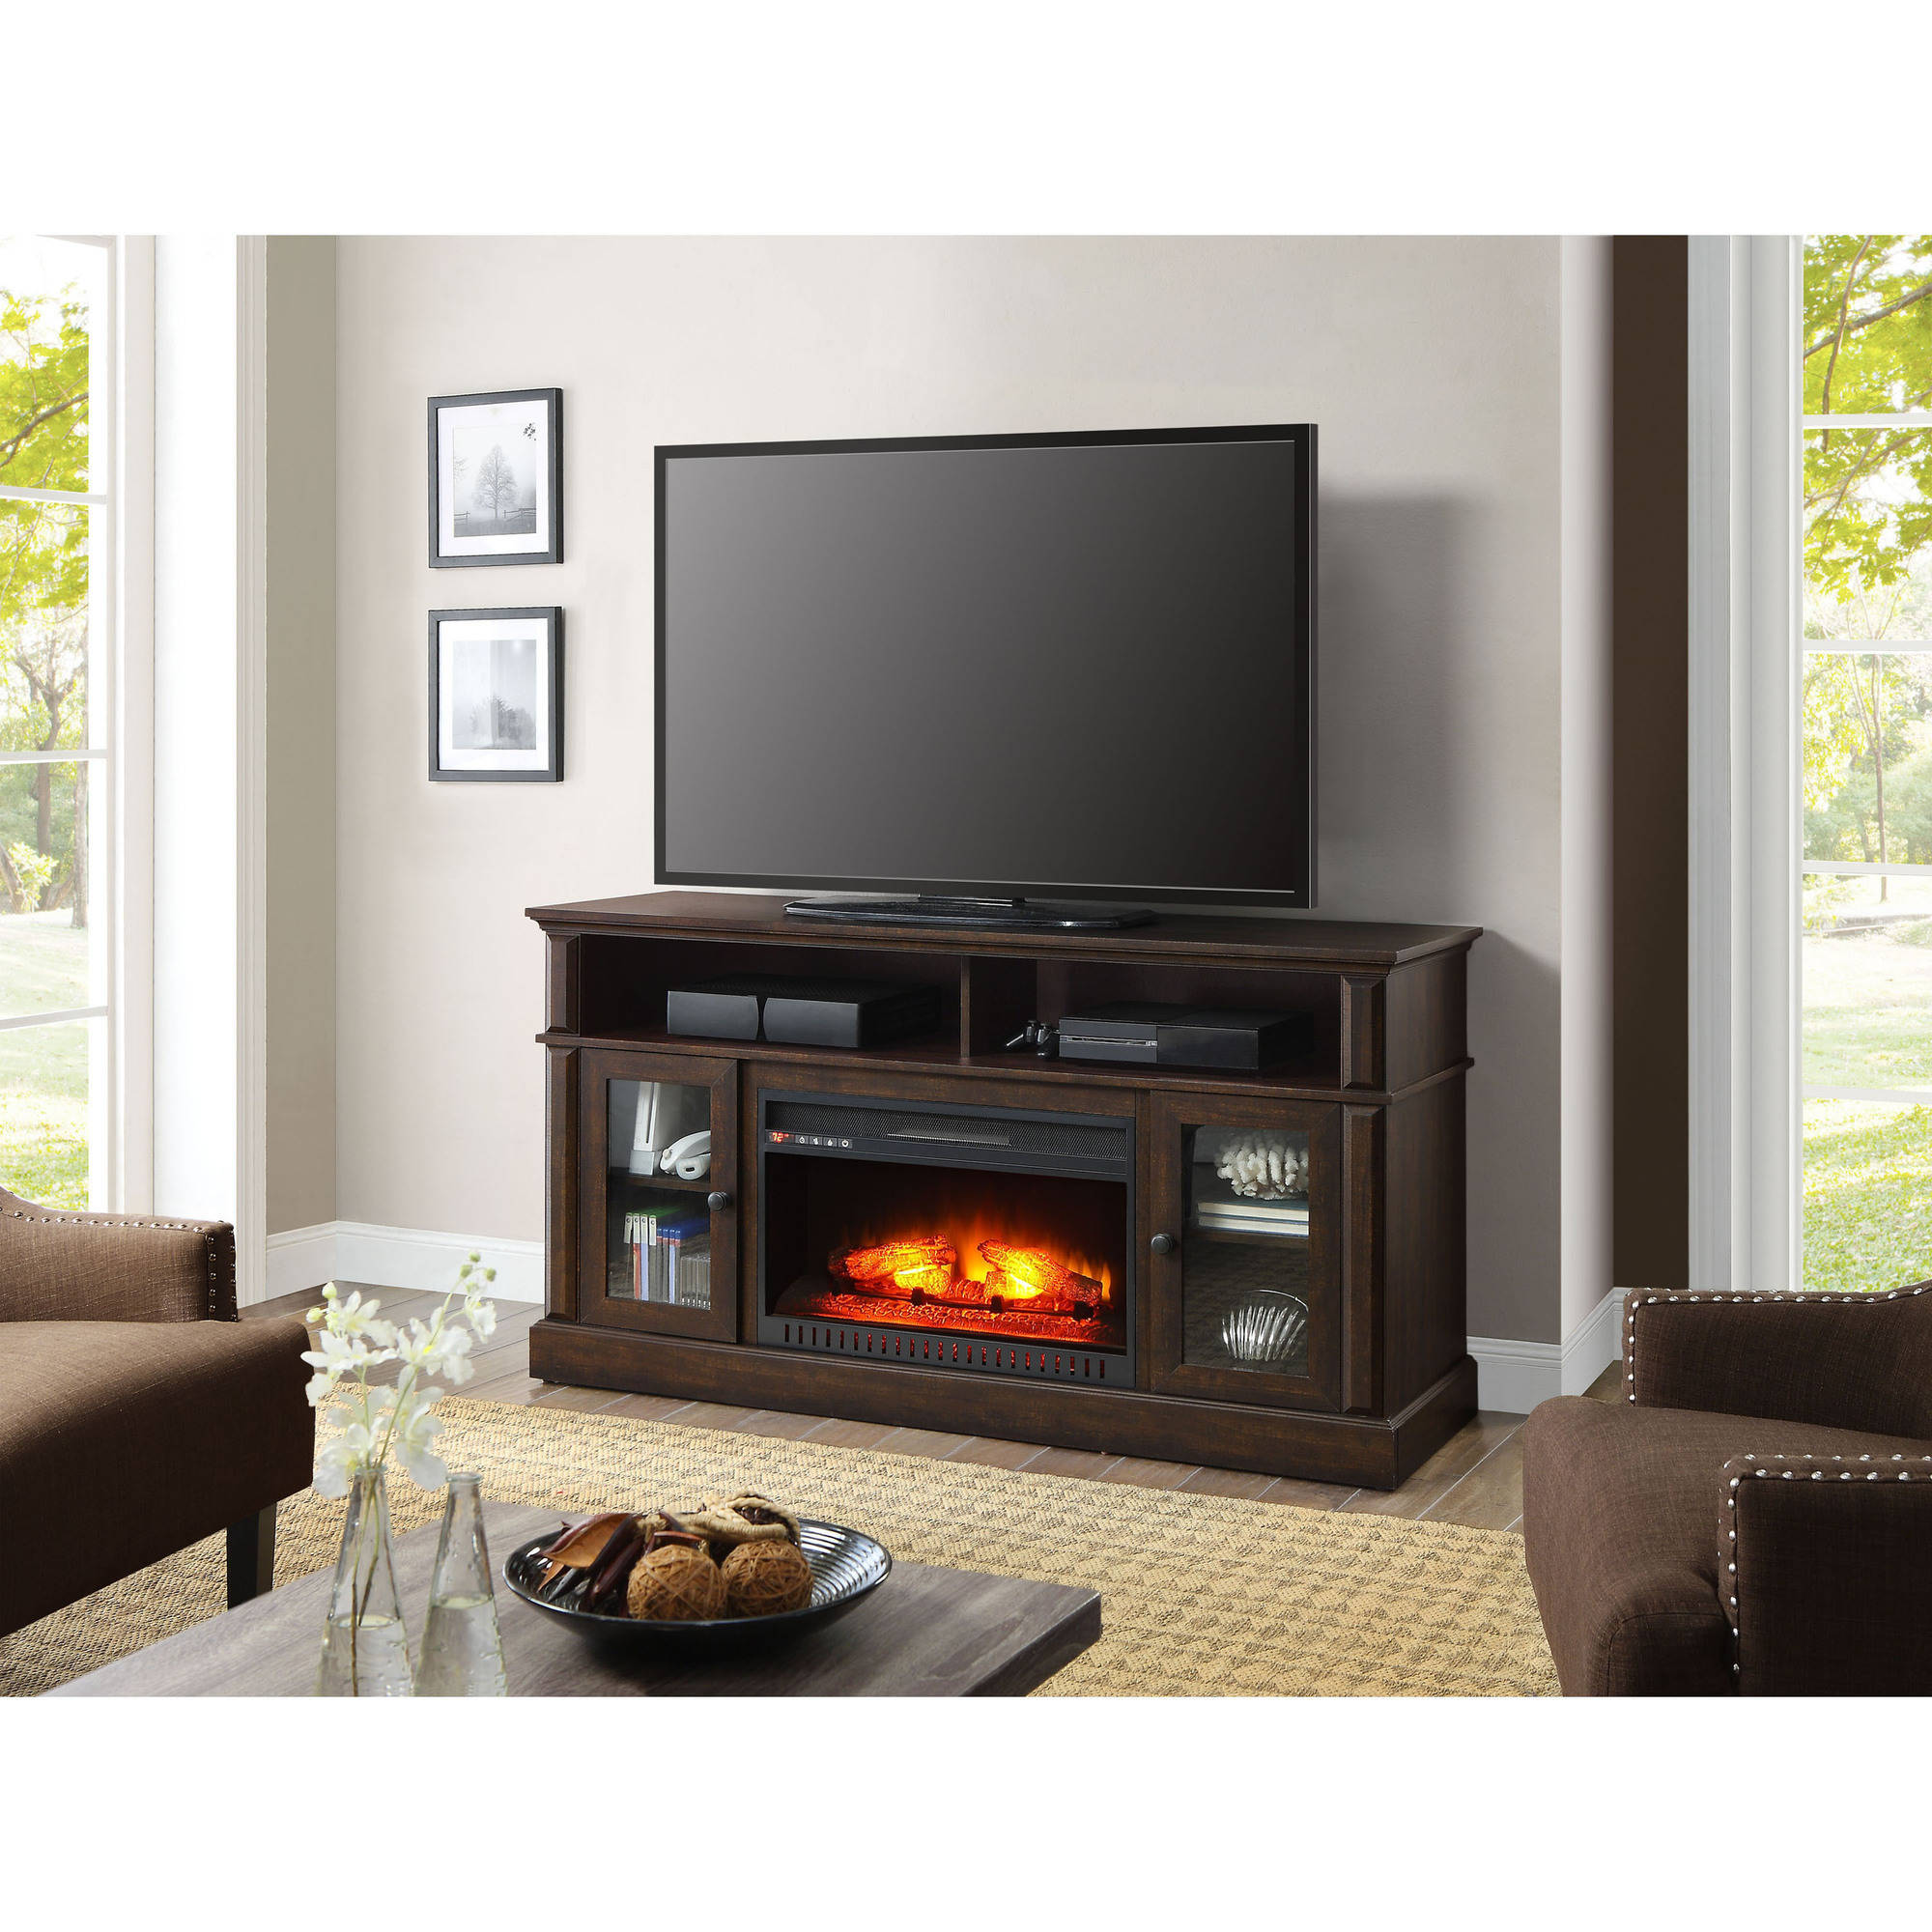 Tv Over Wood Burning Fireplace Inspirational Whalen Barston Media Fireplace for Tv S Up to 70 Multiple